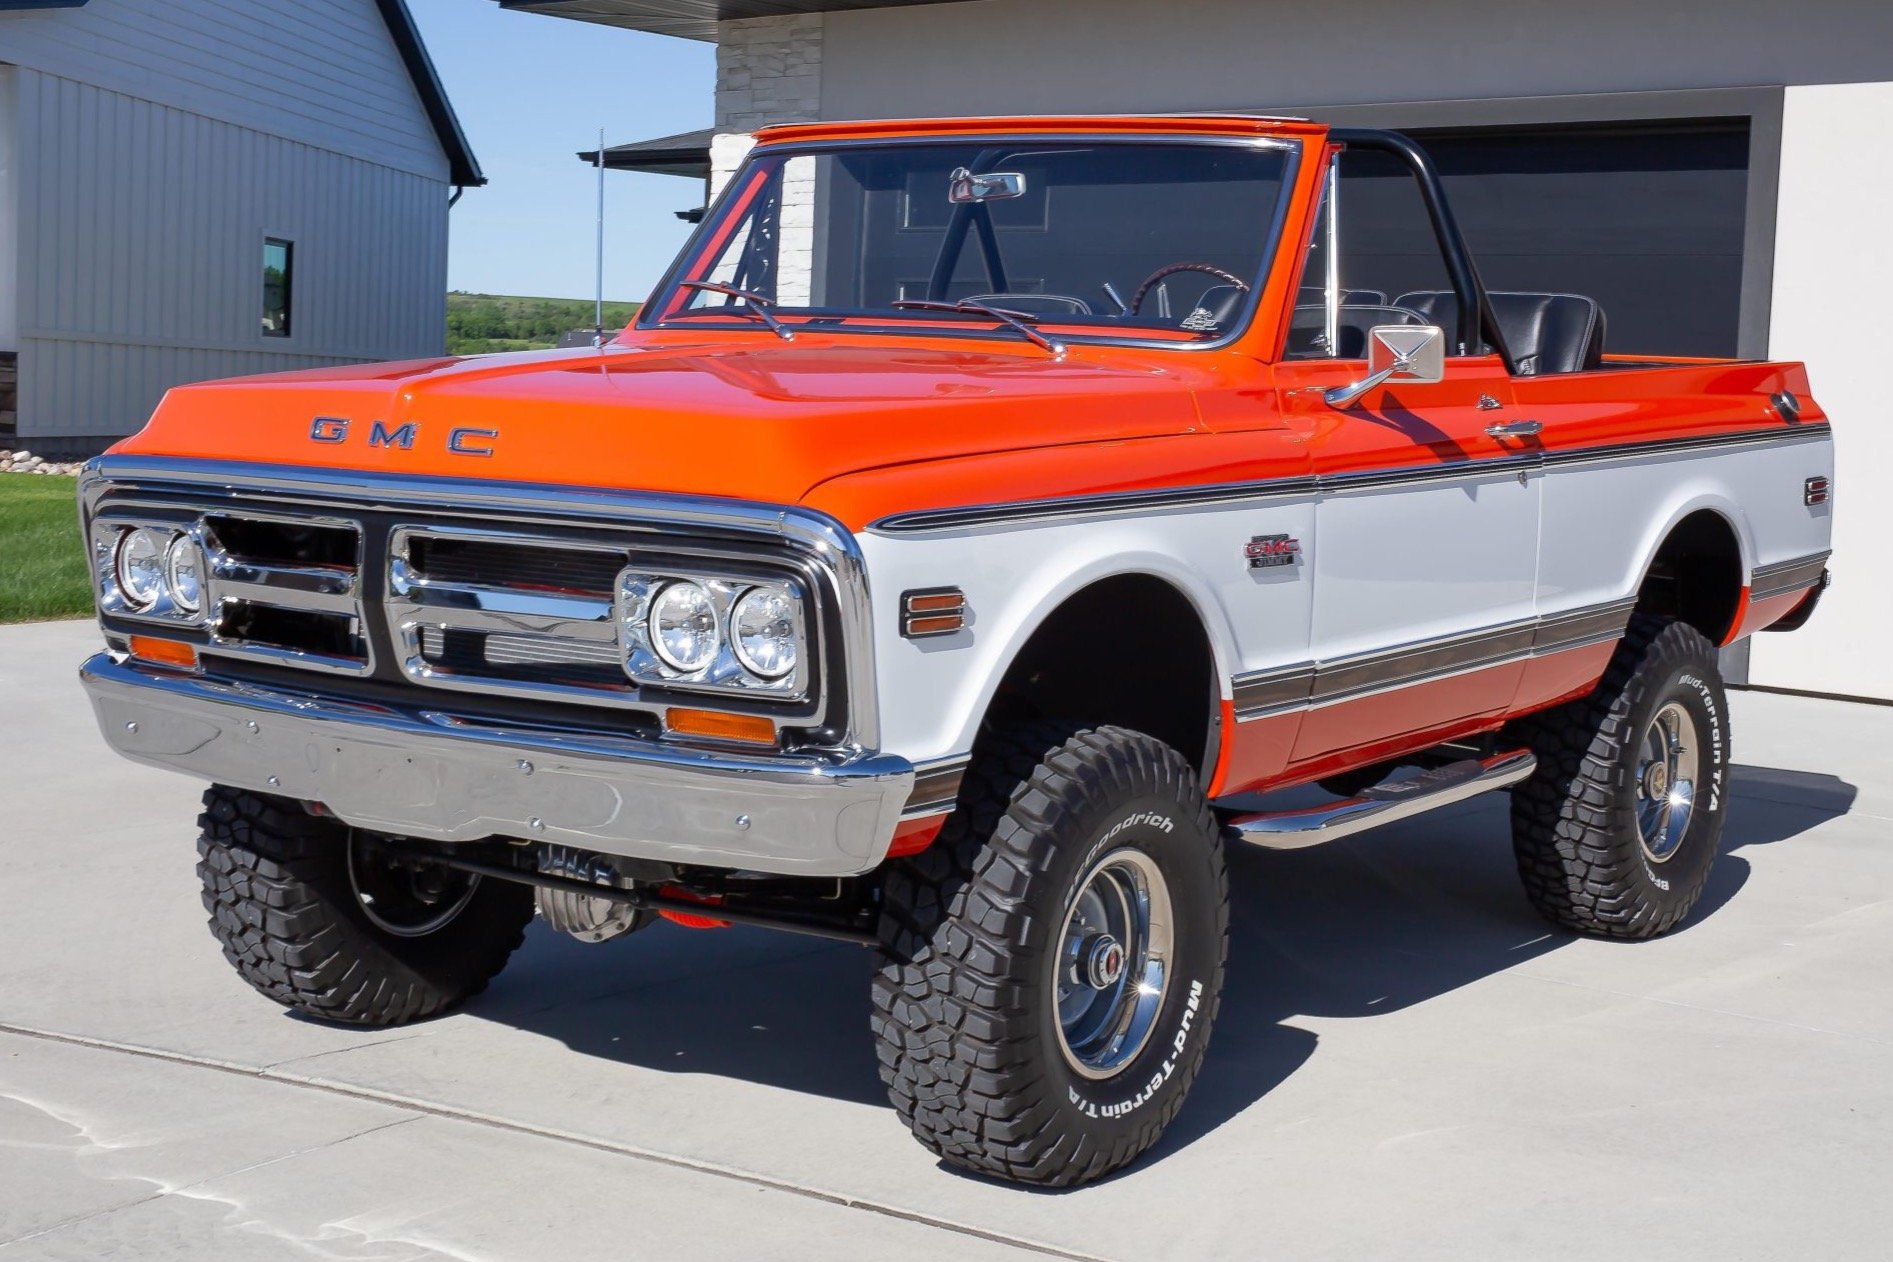 Supercharged 6.0L-Powered 1972 GMC Jimmy 4×4